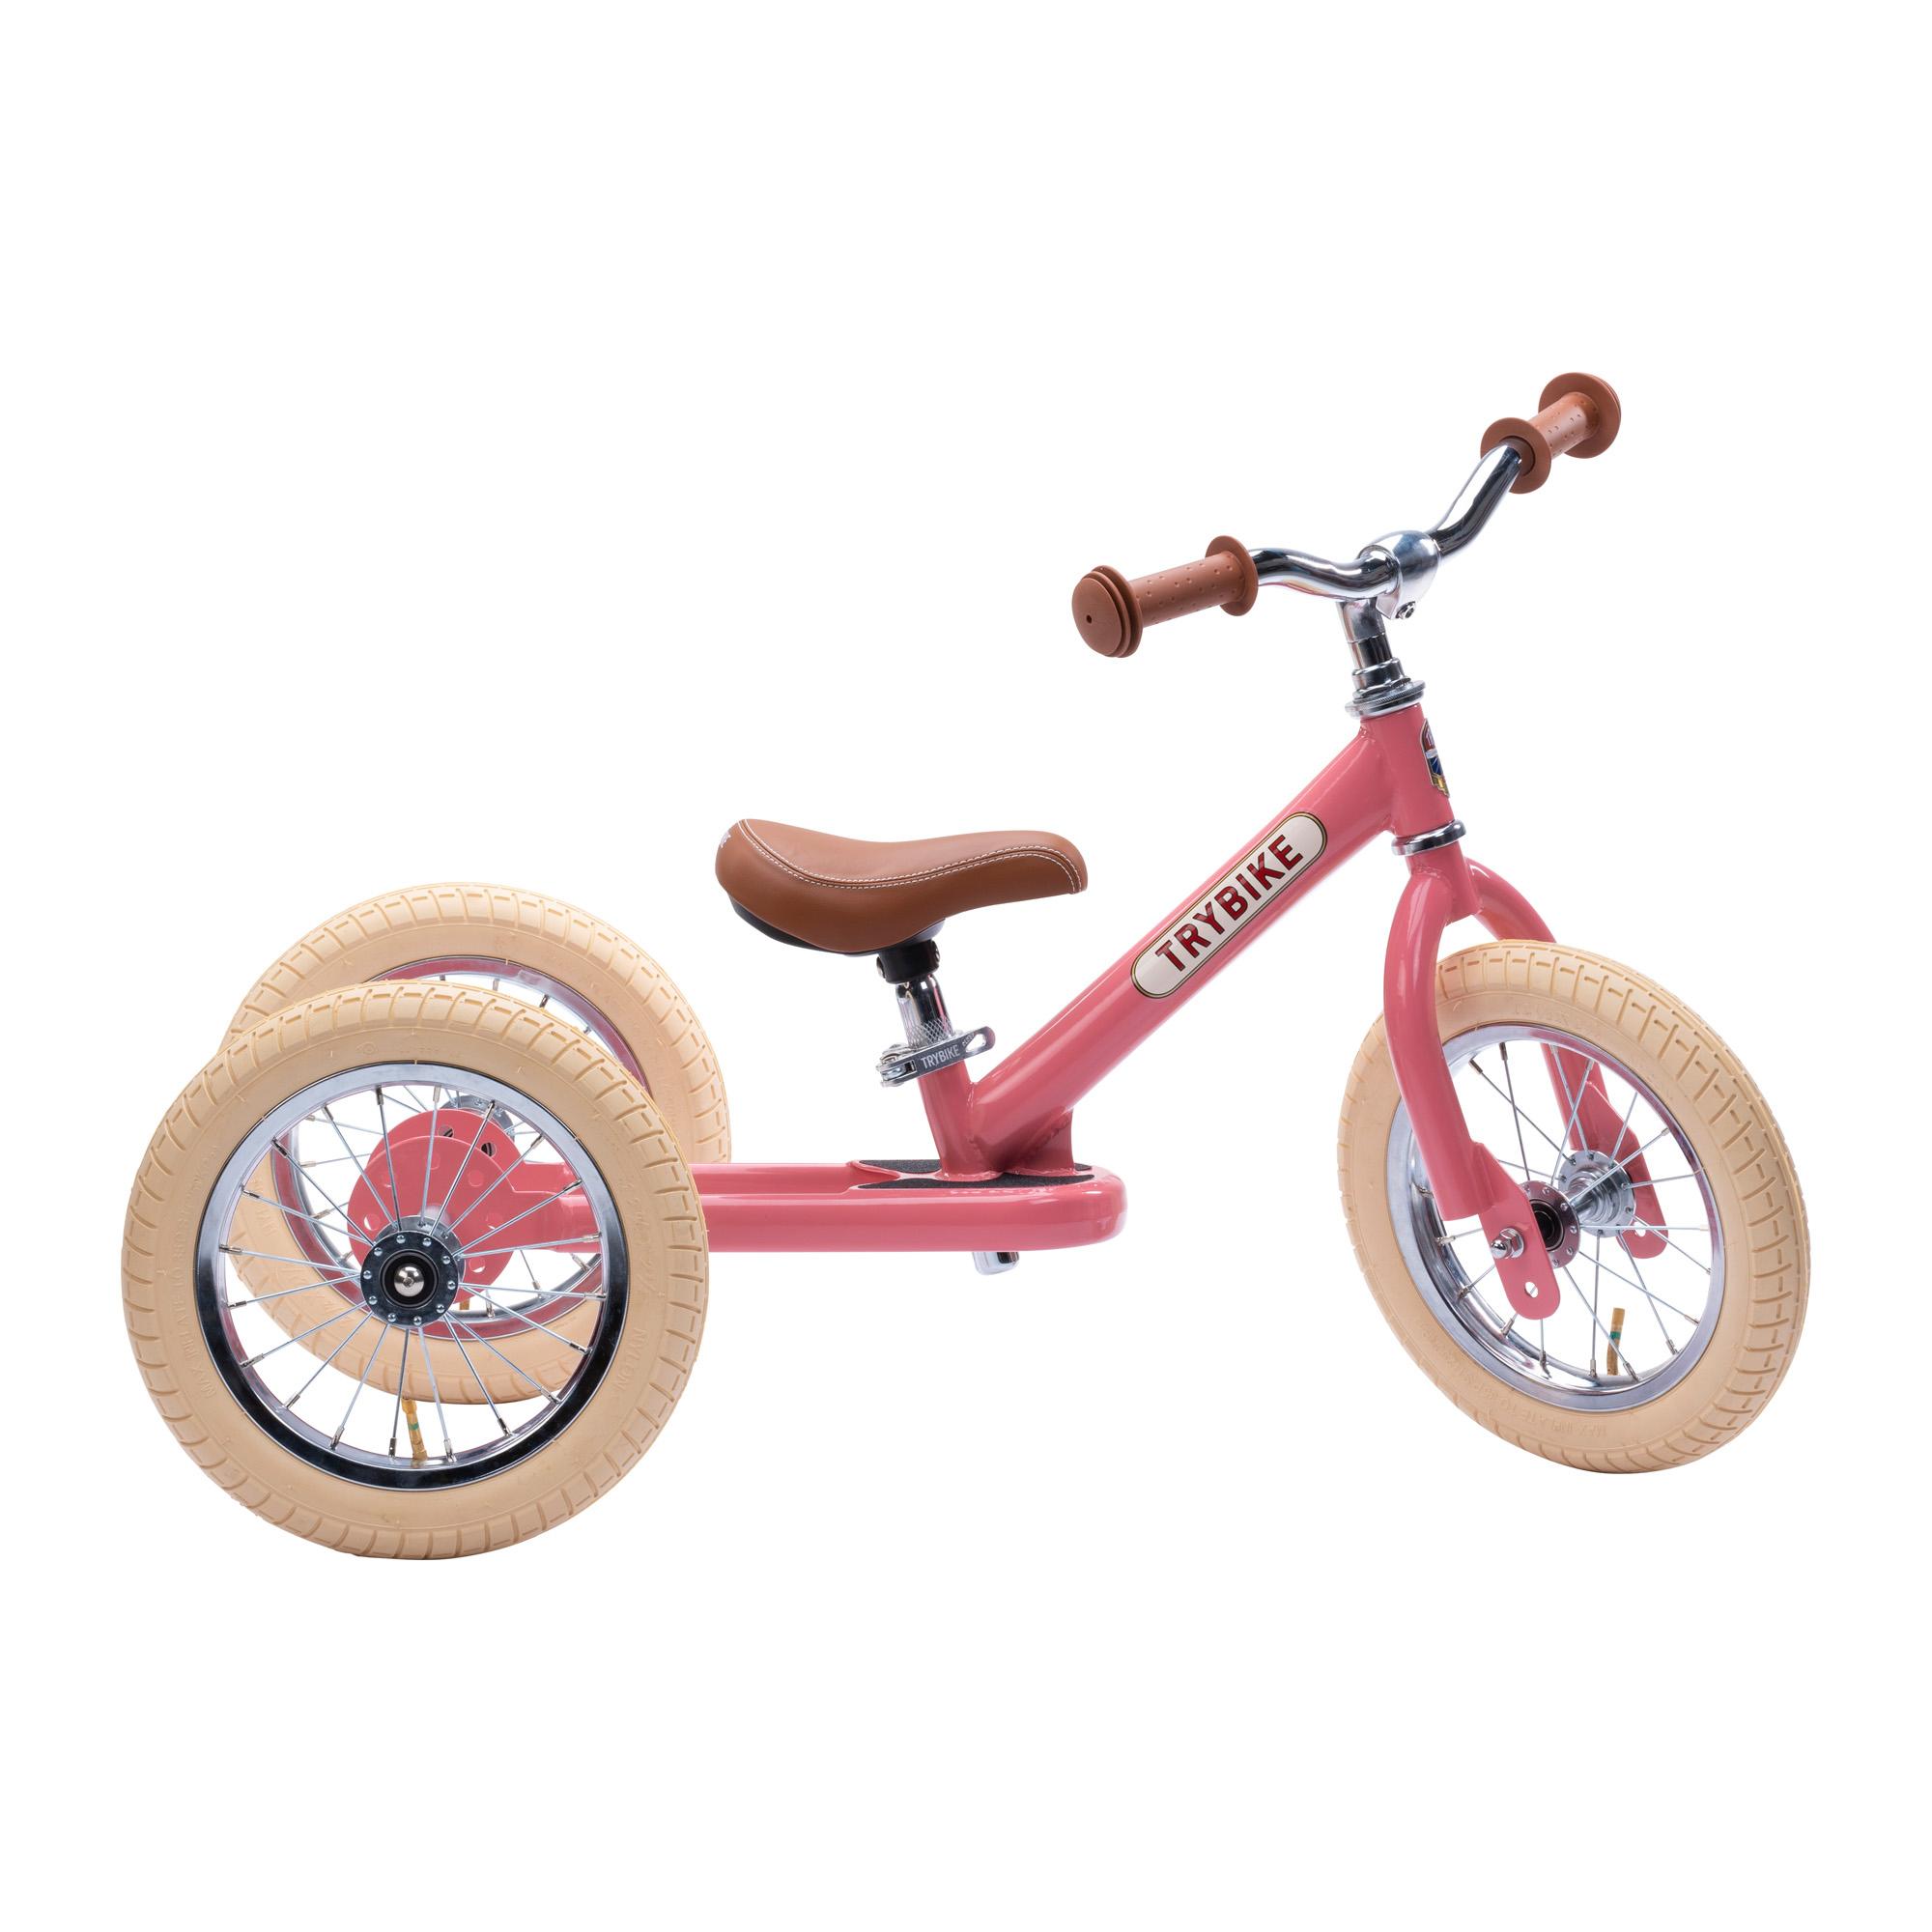 Side view of pink trybike with cream tyres and brown leather-look seat and handles.